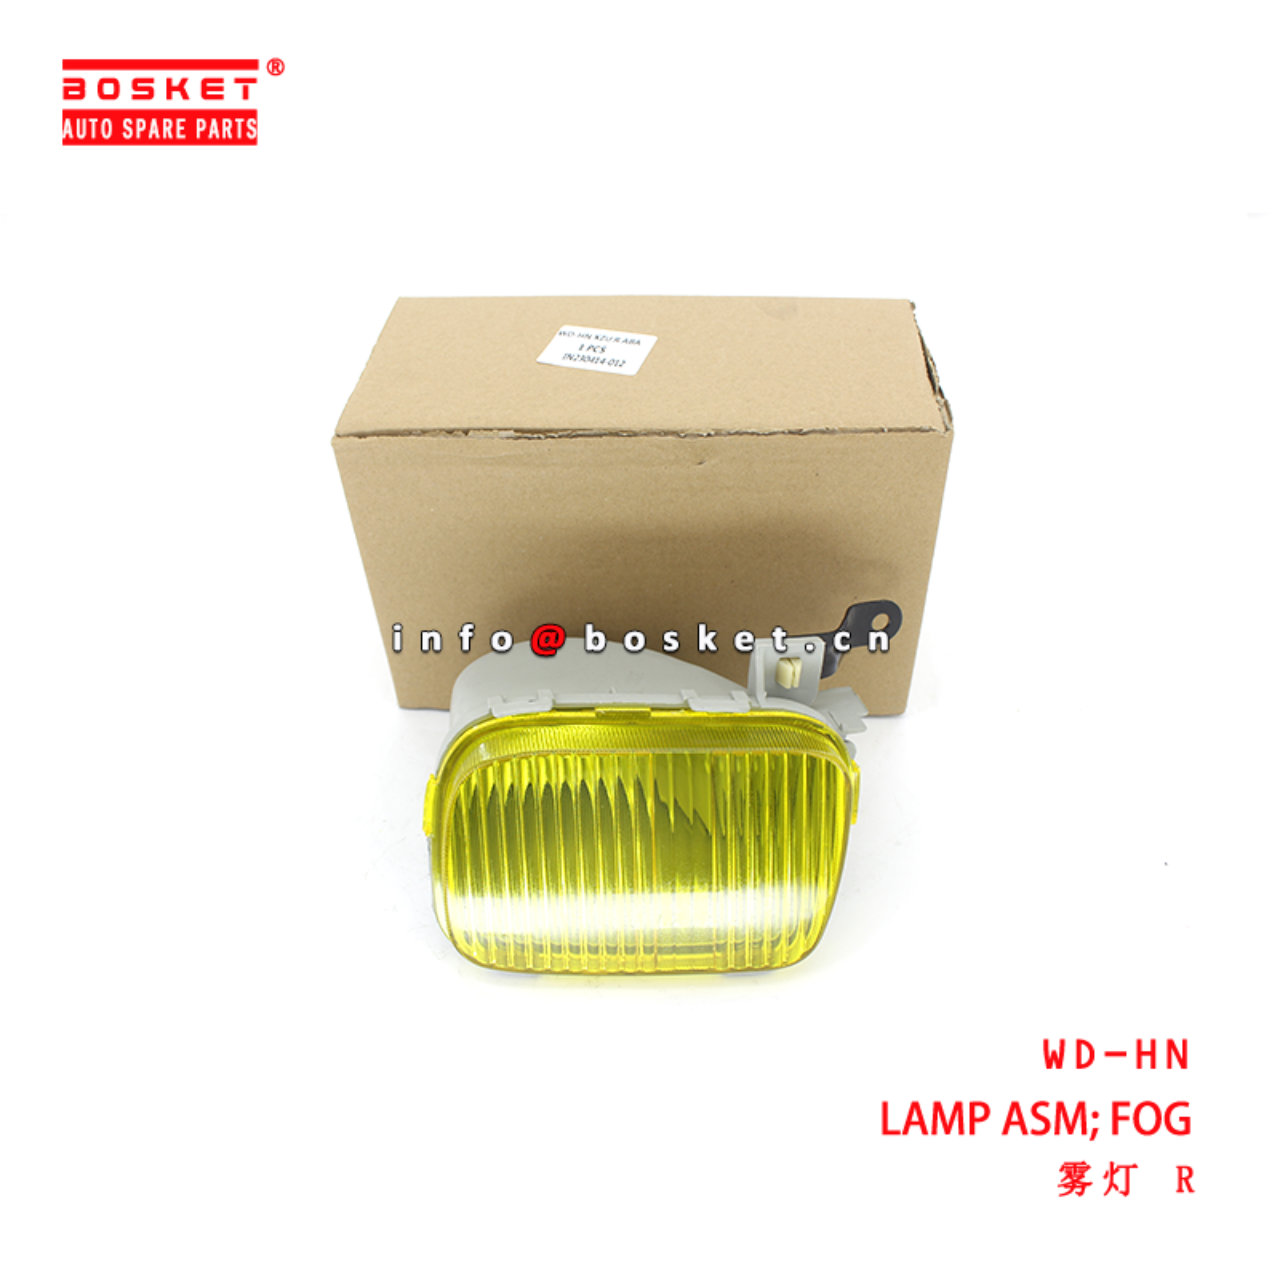 WD-HN Fog Lamp Assembly suitable for ISUZU HINO XZU W04D